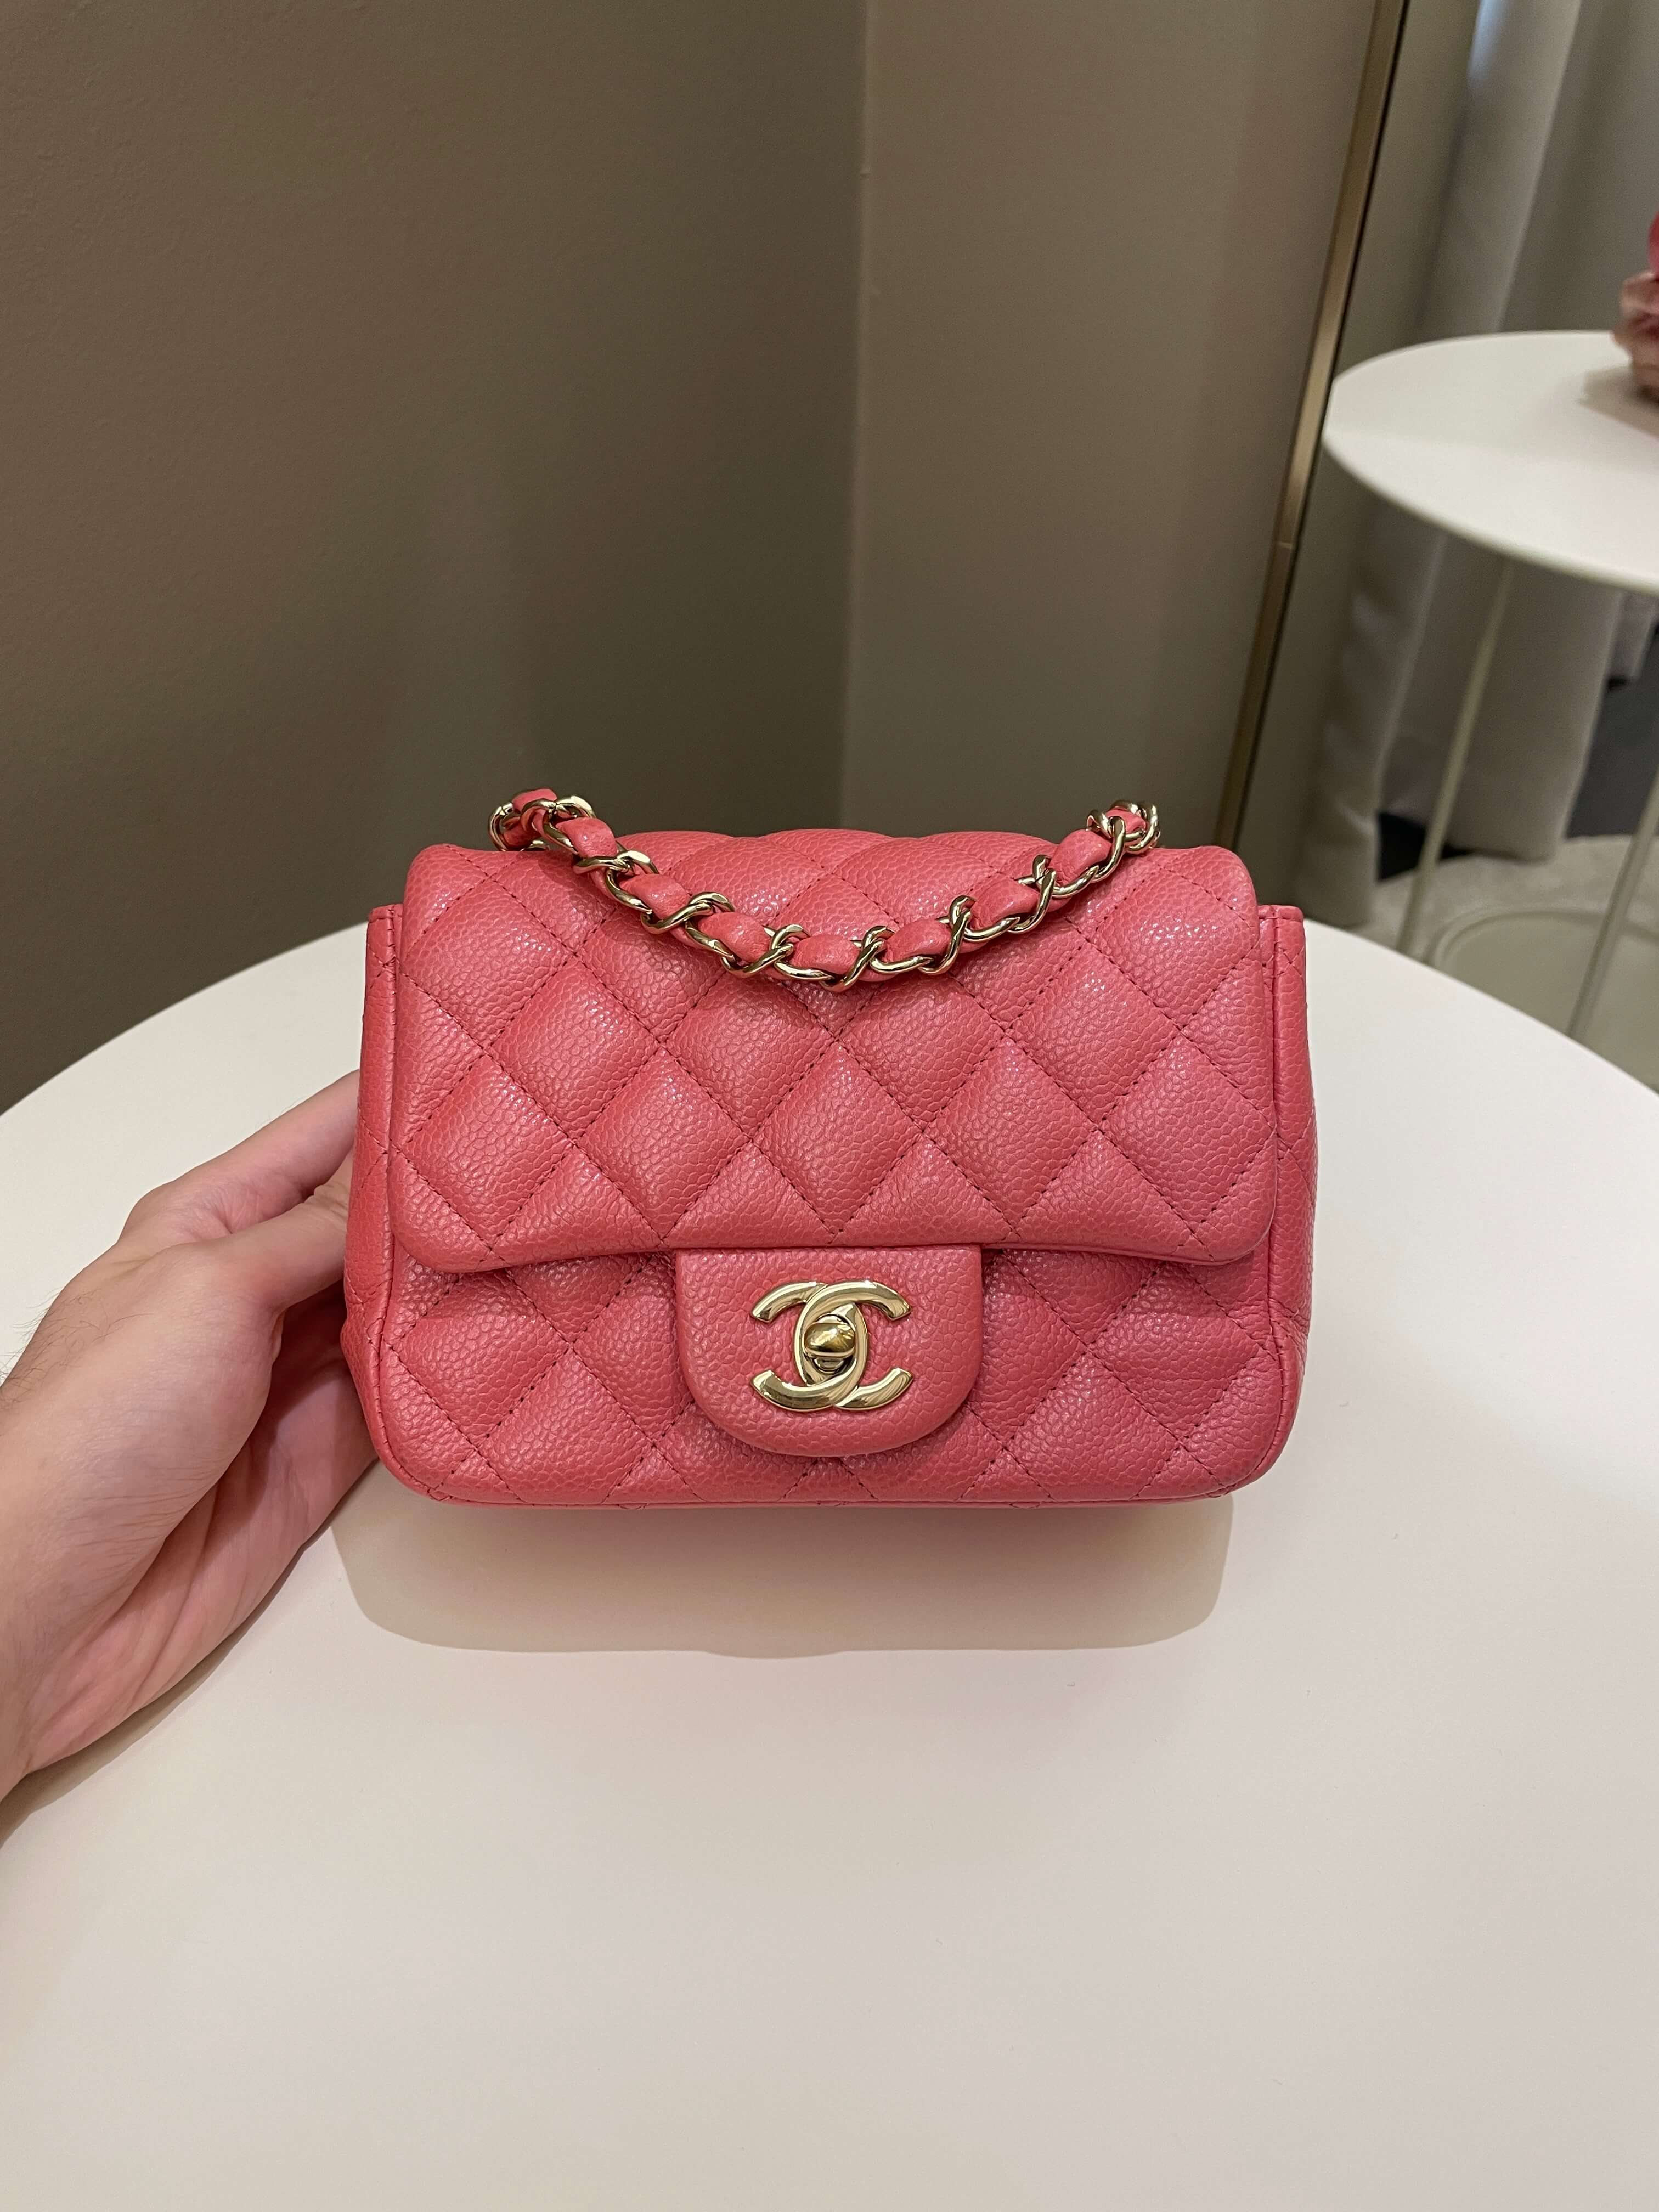 Chanel Extra Mini Flap Quilted Leather Crossbody Bag